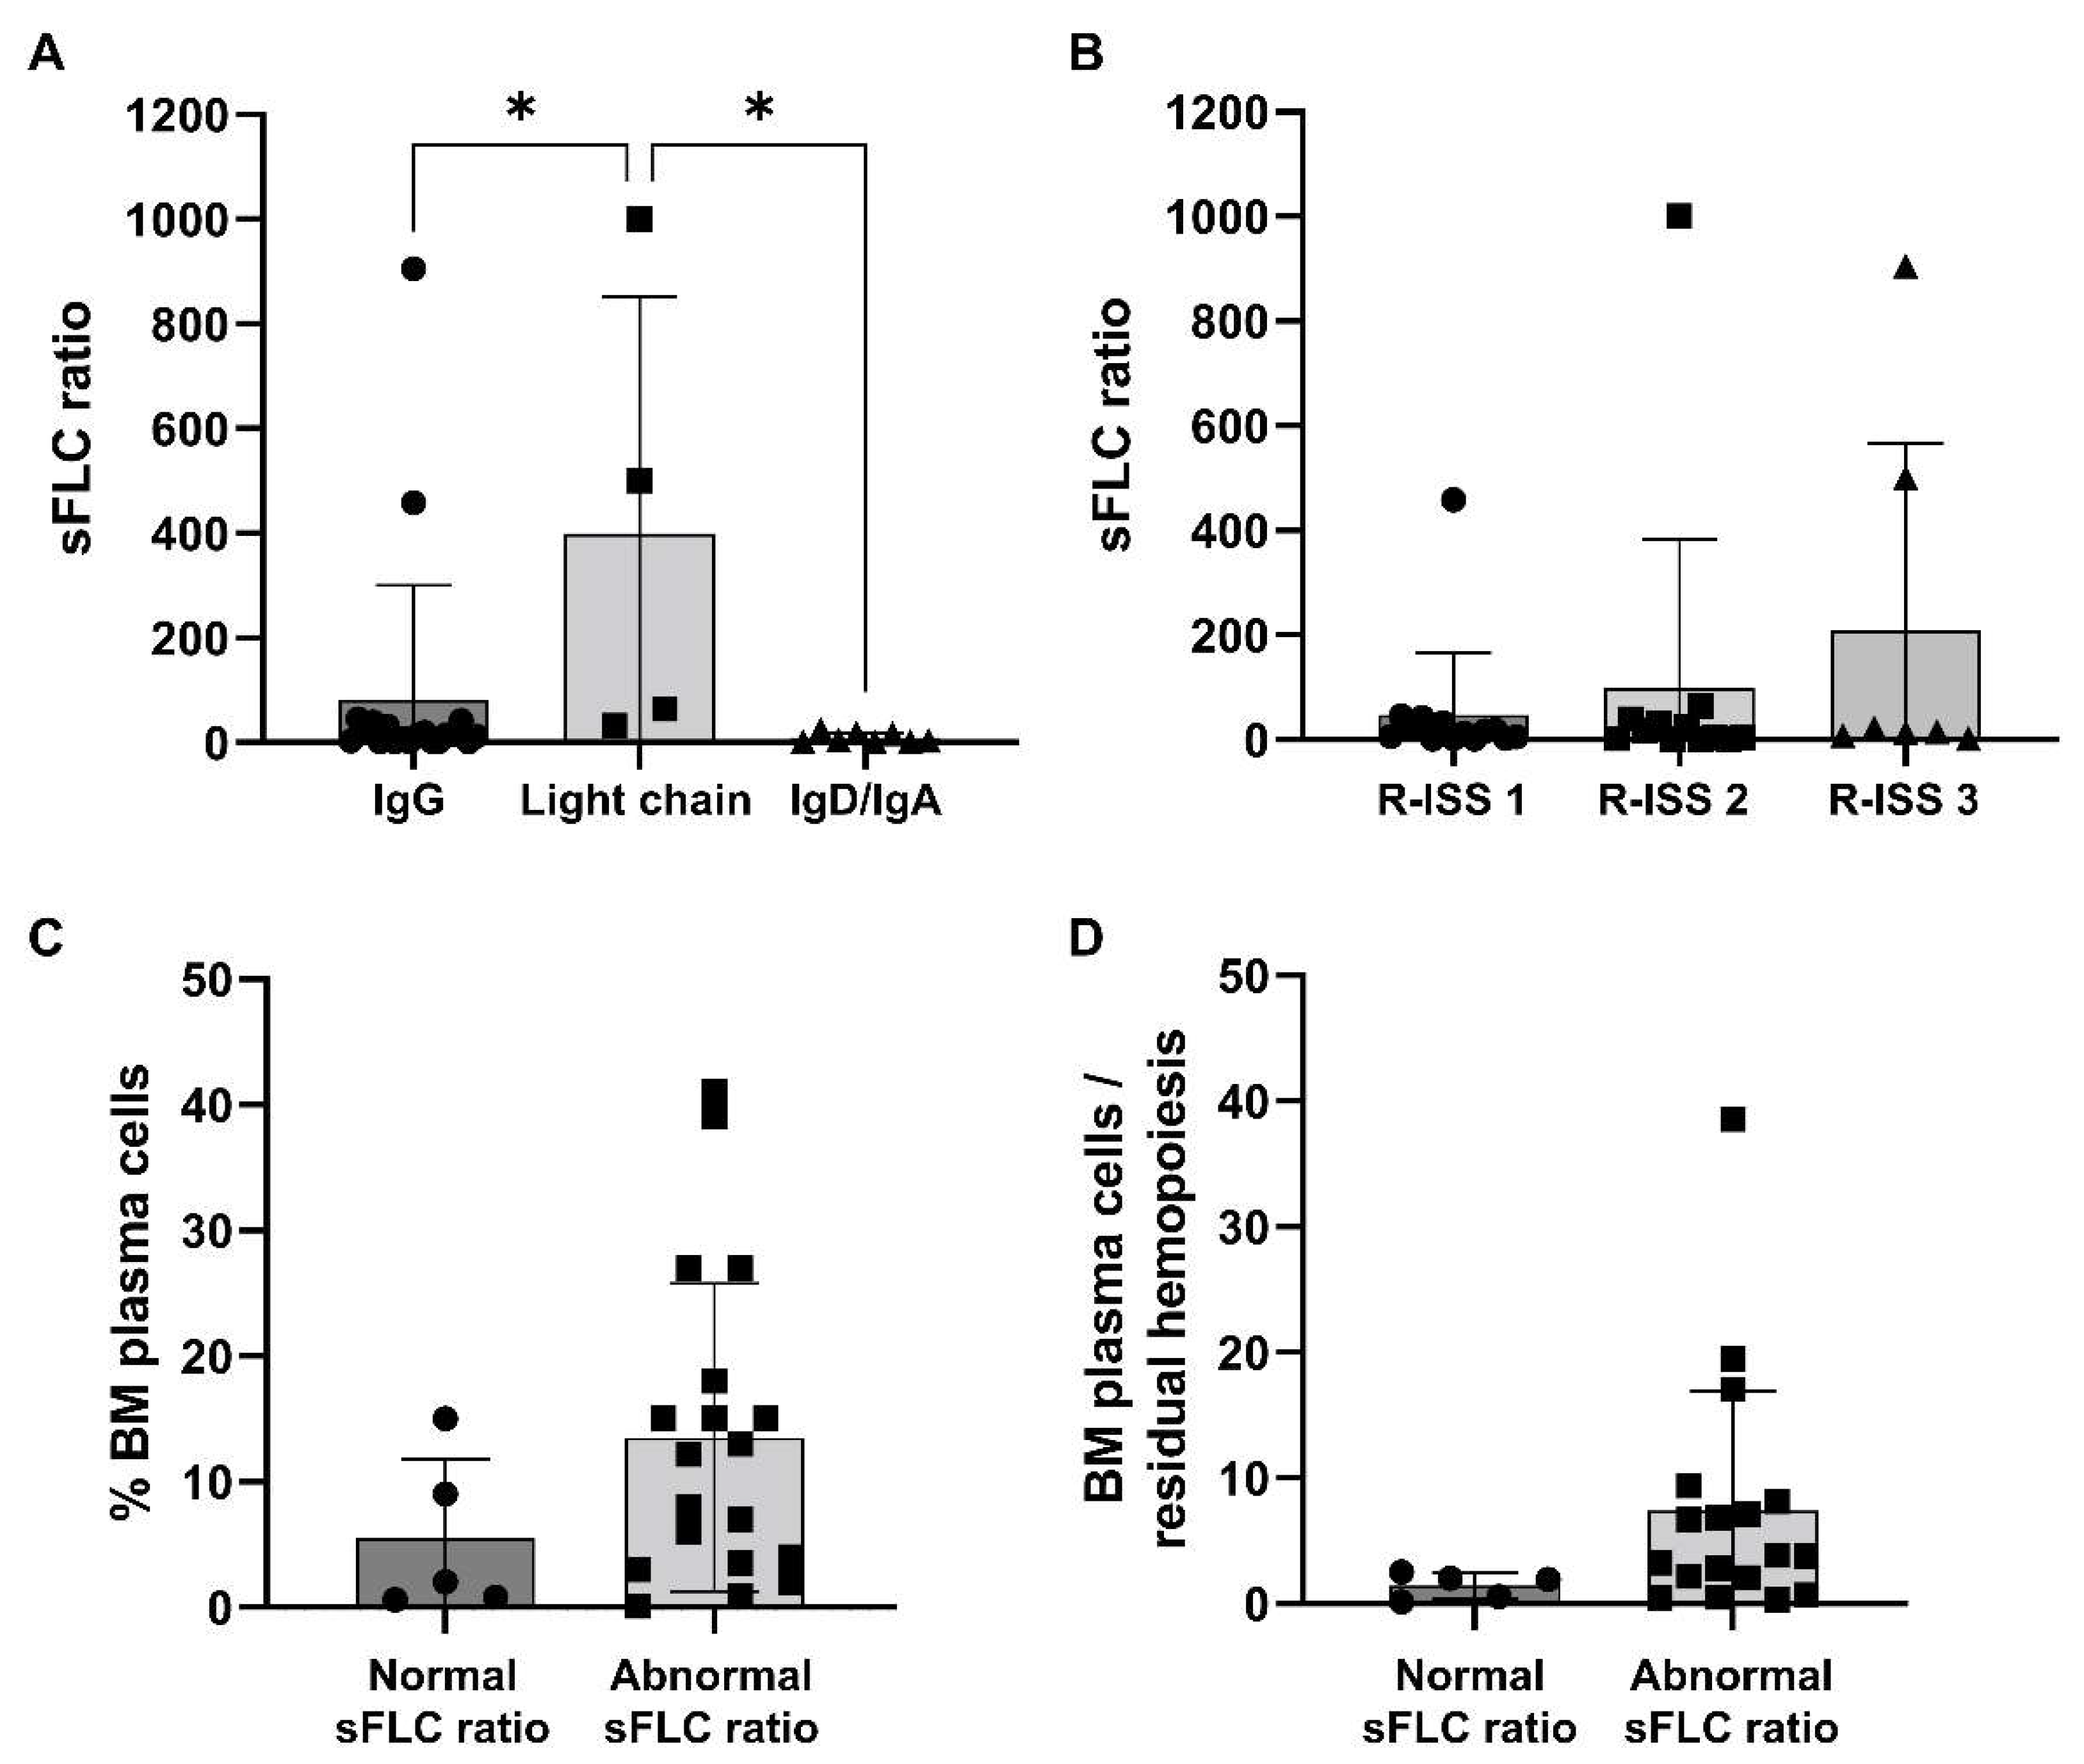 Biomedicines | Free Full-Text | Serum Free Light-Chain Ratio at Diagnosis Associated with Early Renal Damage in Multiple Myeloma: A Case Series Study